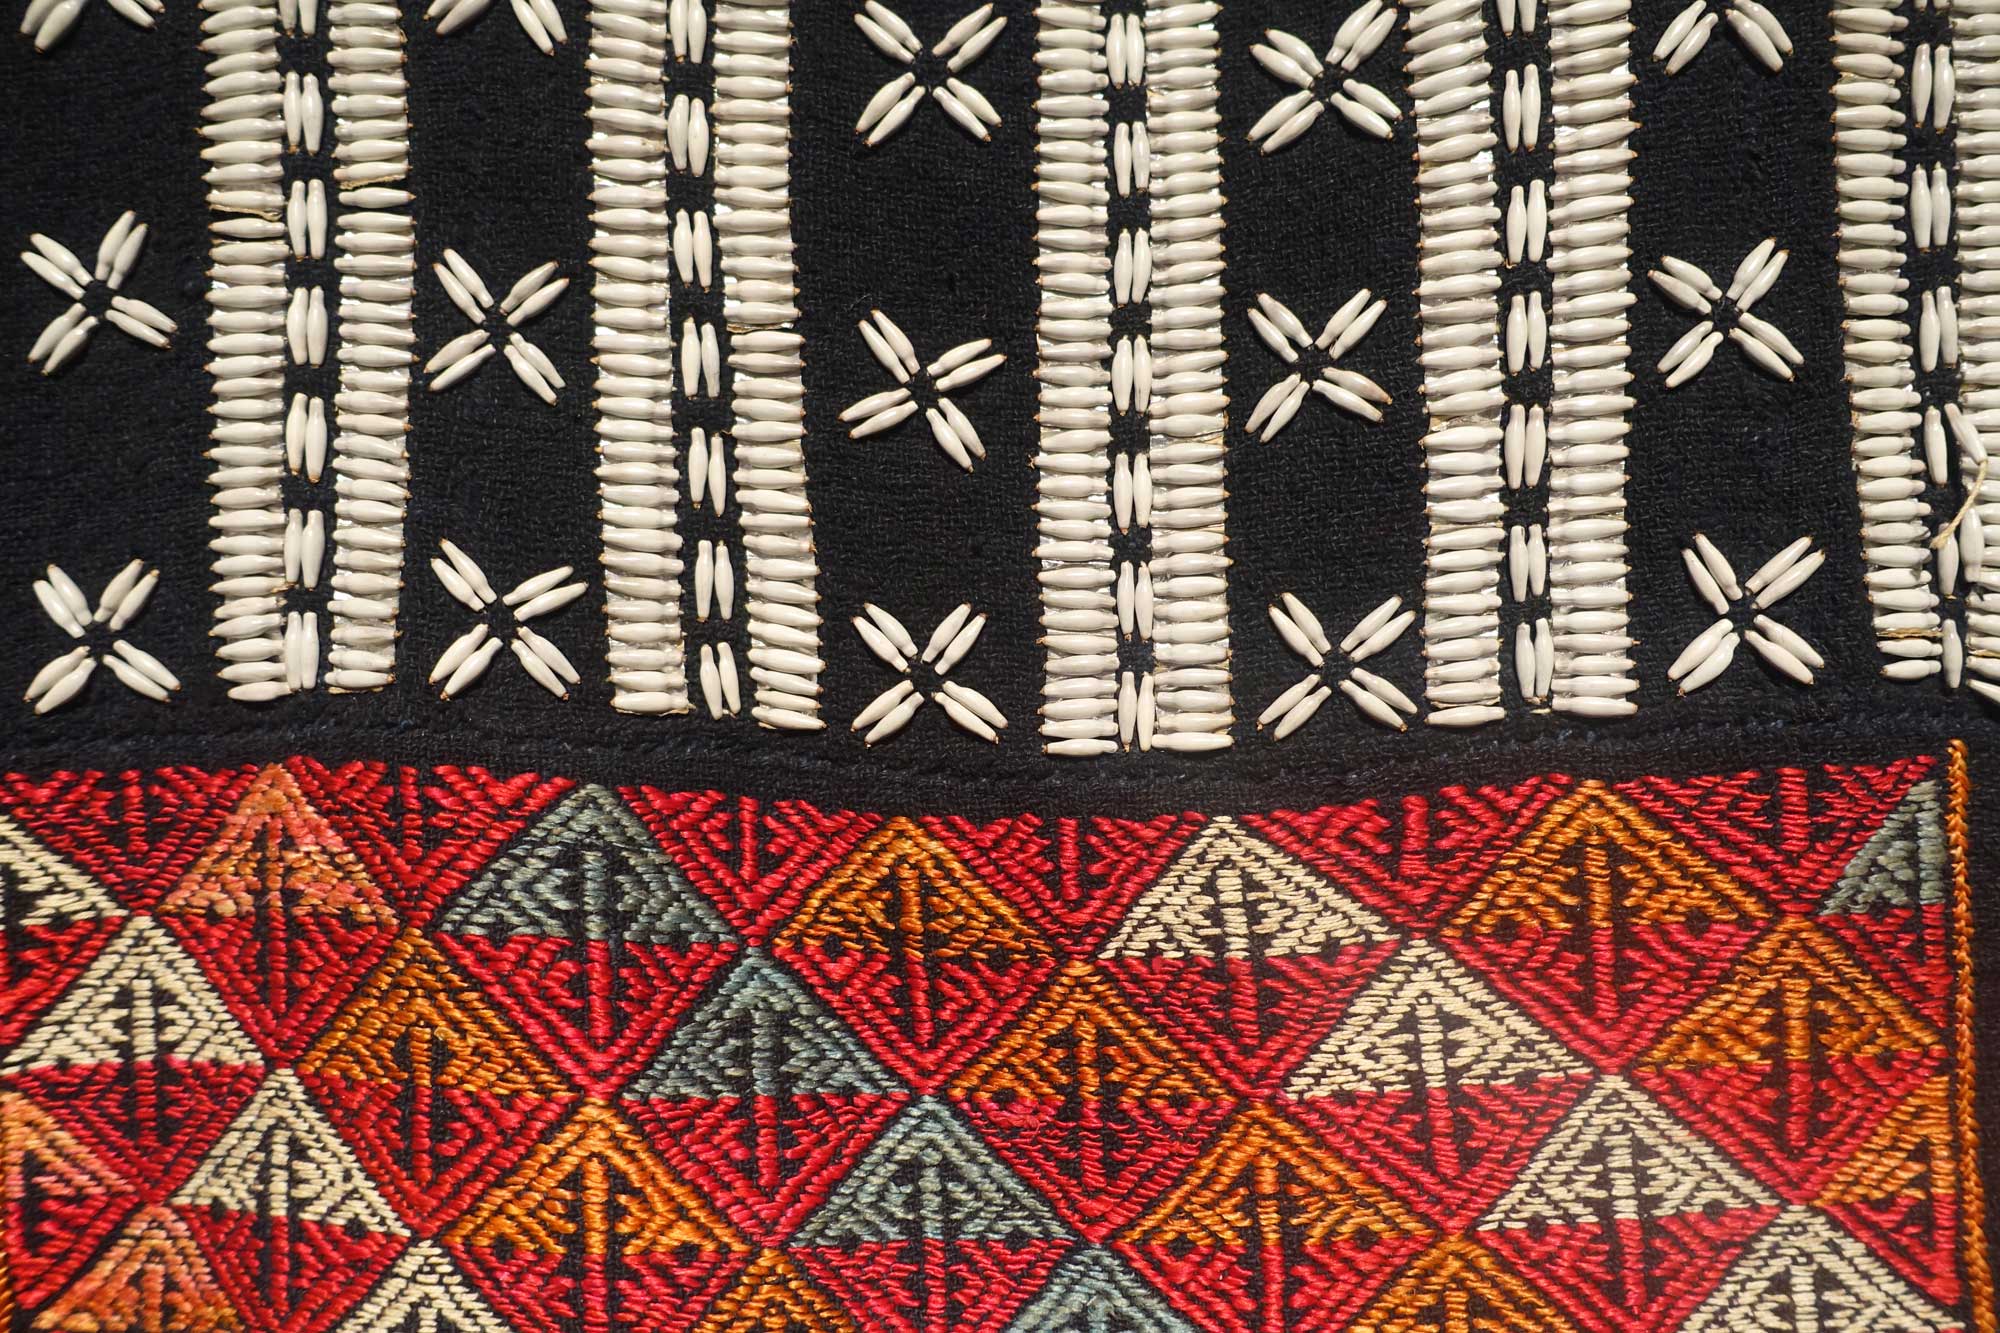 Photograph of a textile decorated with beads from wild adlay, Vietnam. The photo shows part of a textile. The upper part is black whereas the bottom part is multicolored with a woven design. Spindle-shaped adlay beads are organized in designs on the black part of the textile, including "x's" and parallel rows.